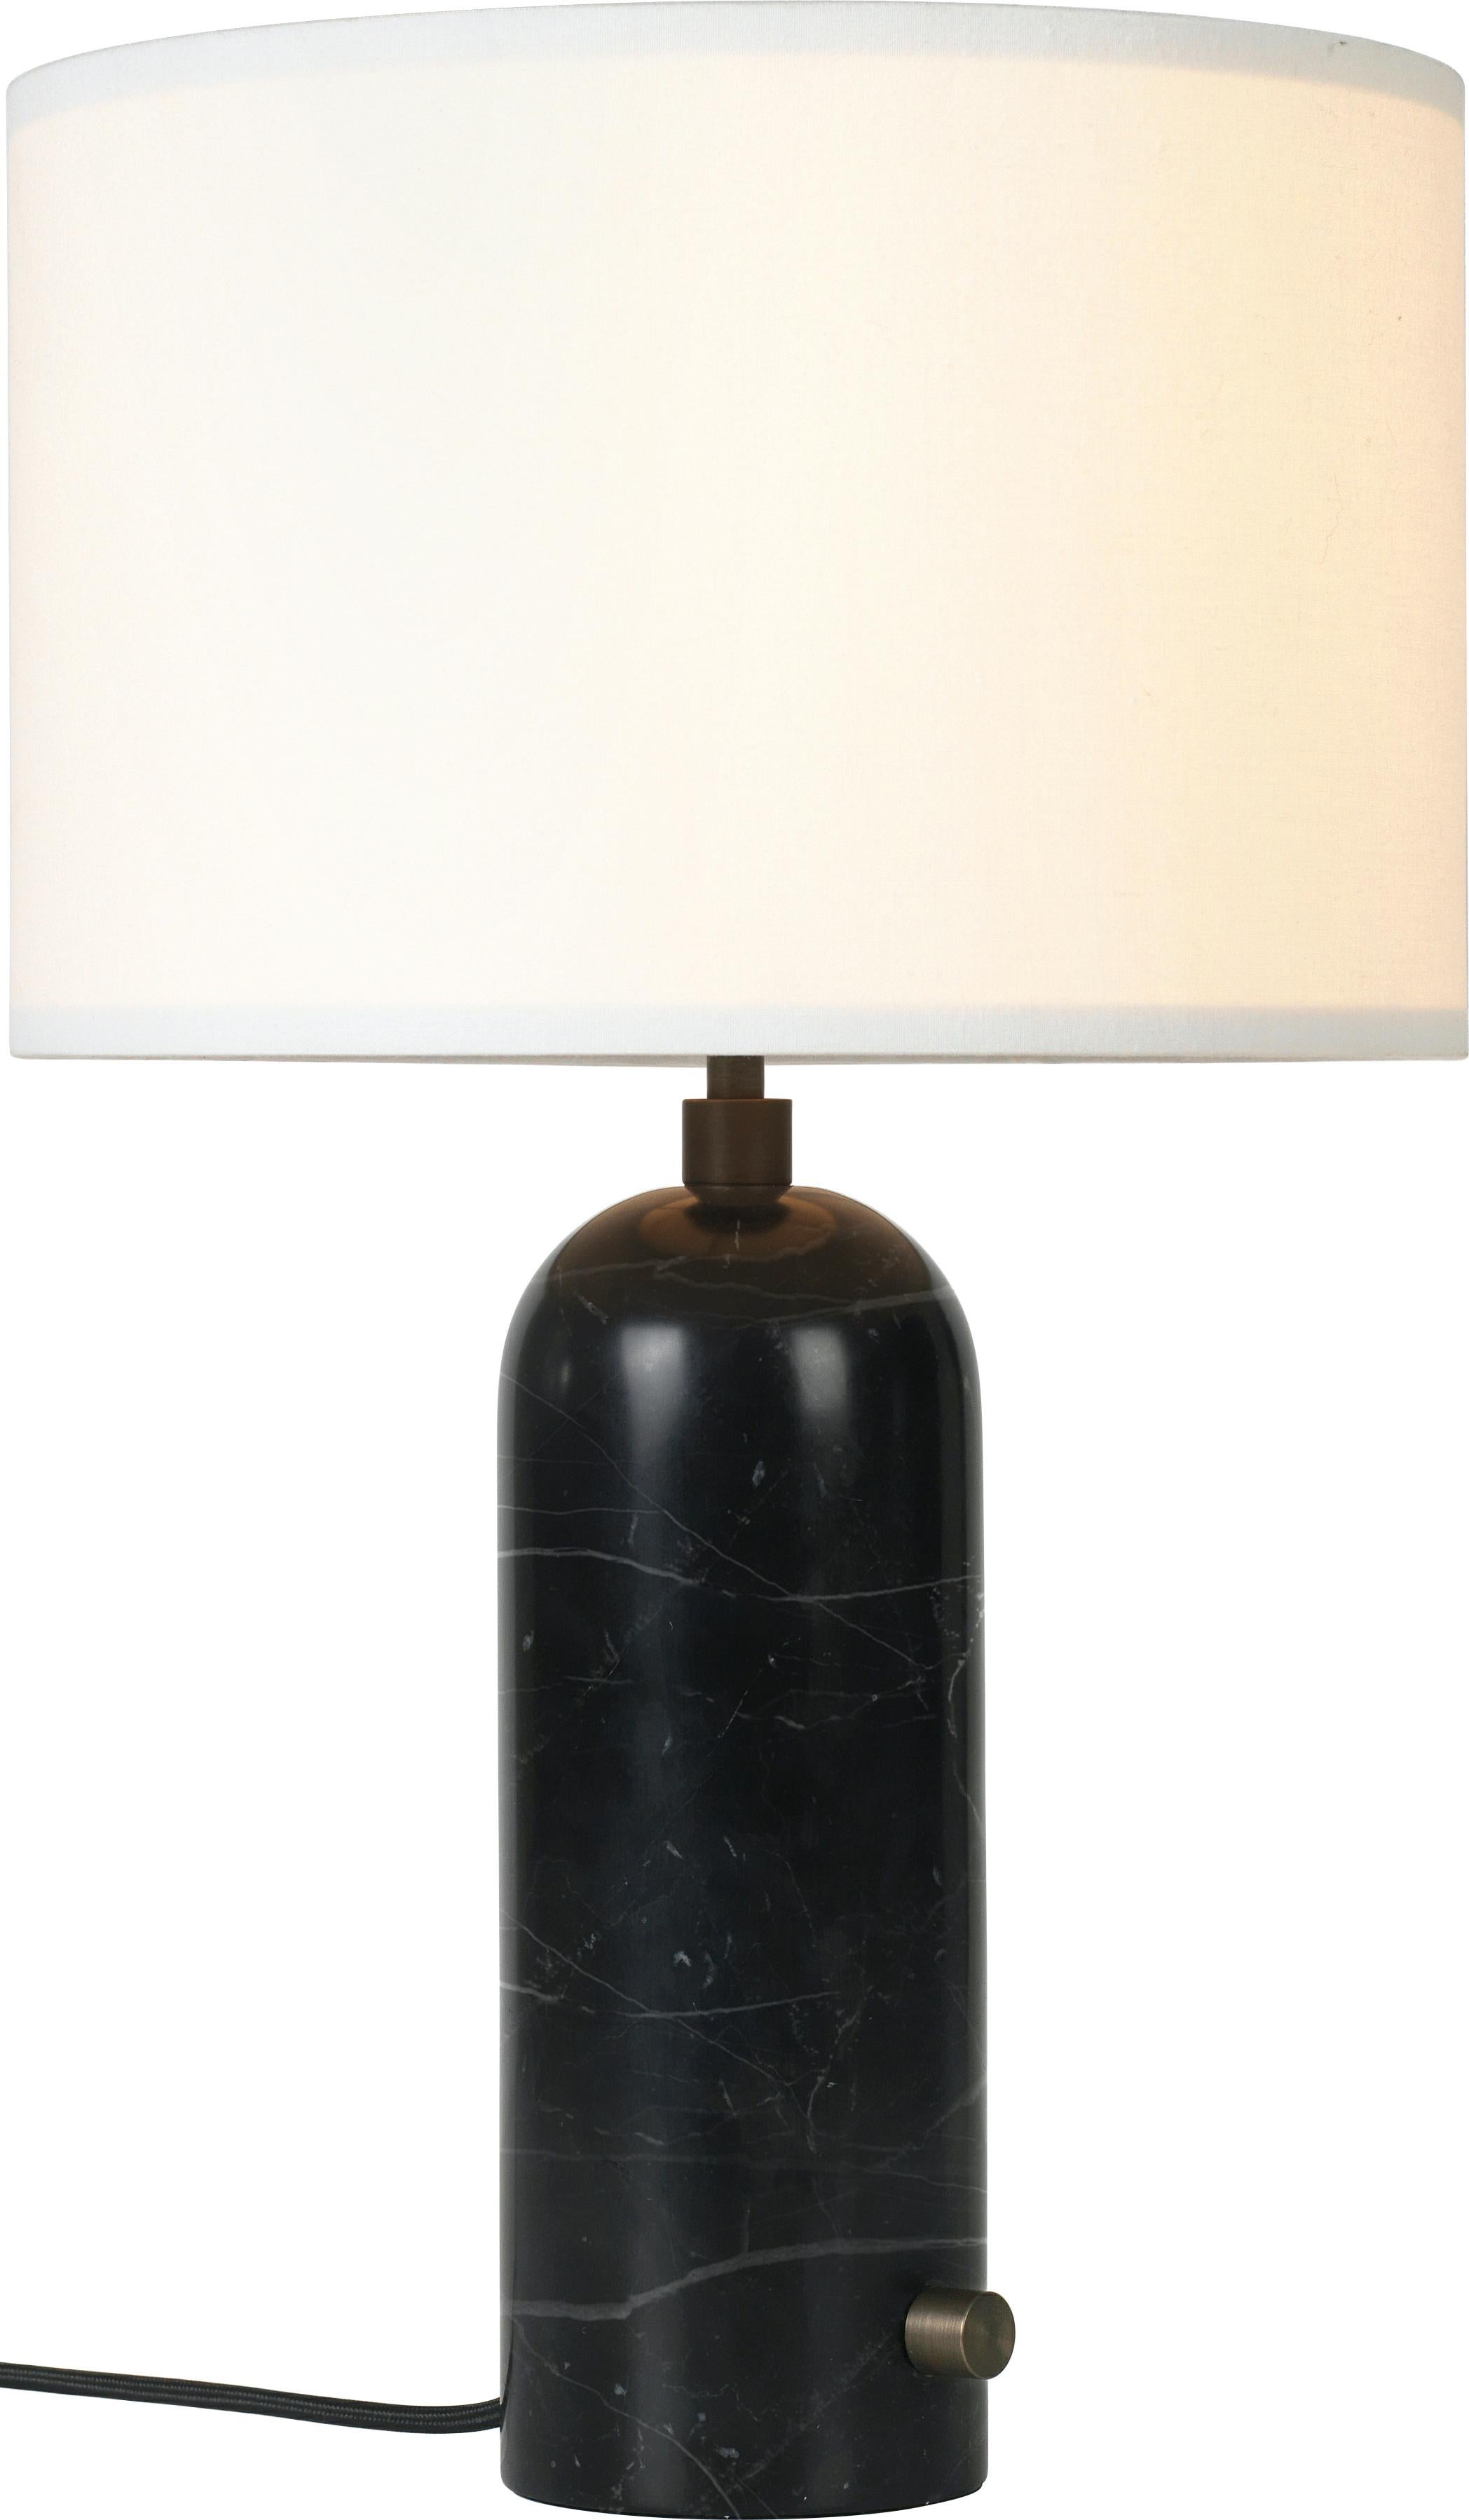 Contemporary Large 'Gravity' Blackened Steel Table Lamp by Space Copenhagen for Gubi For Sale